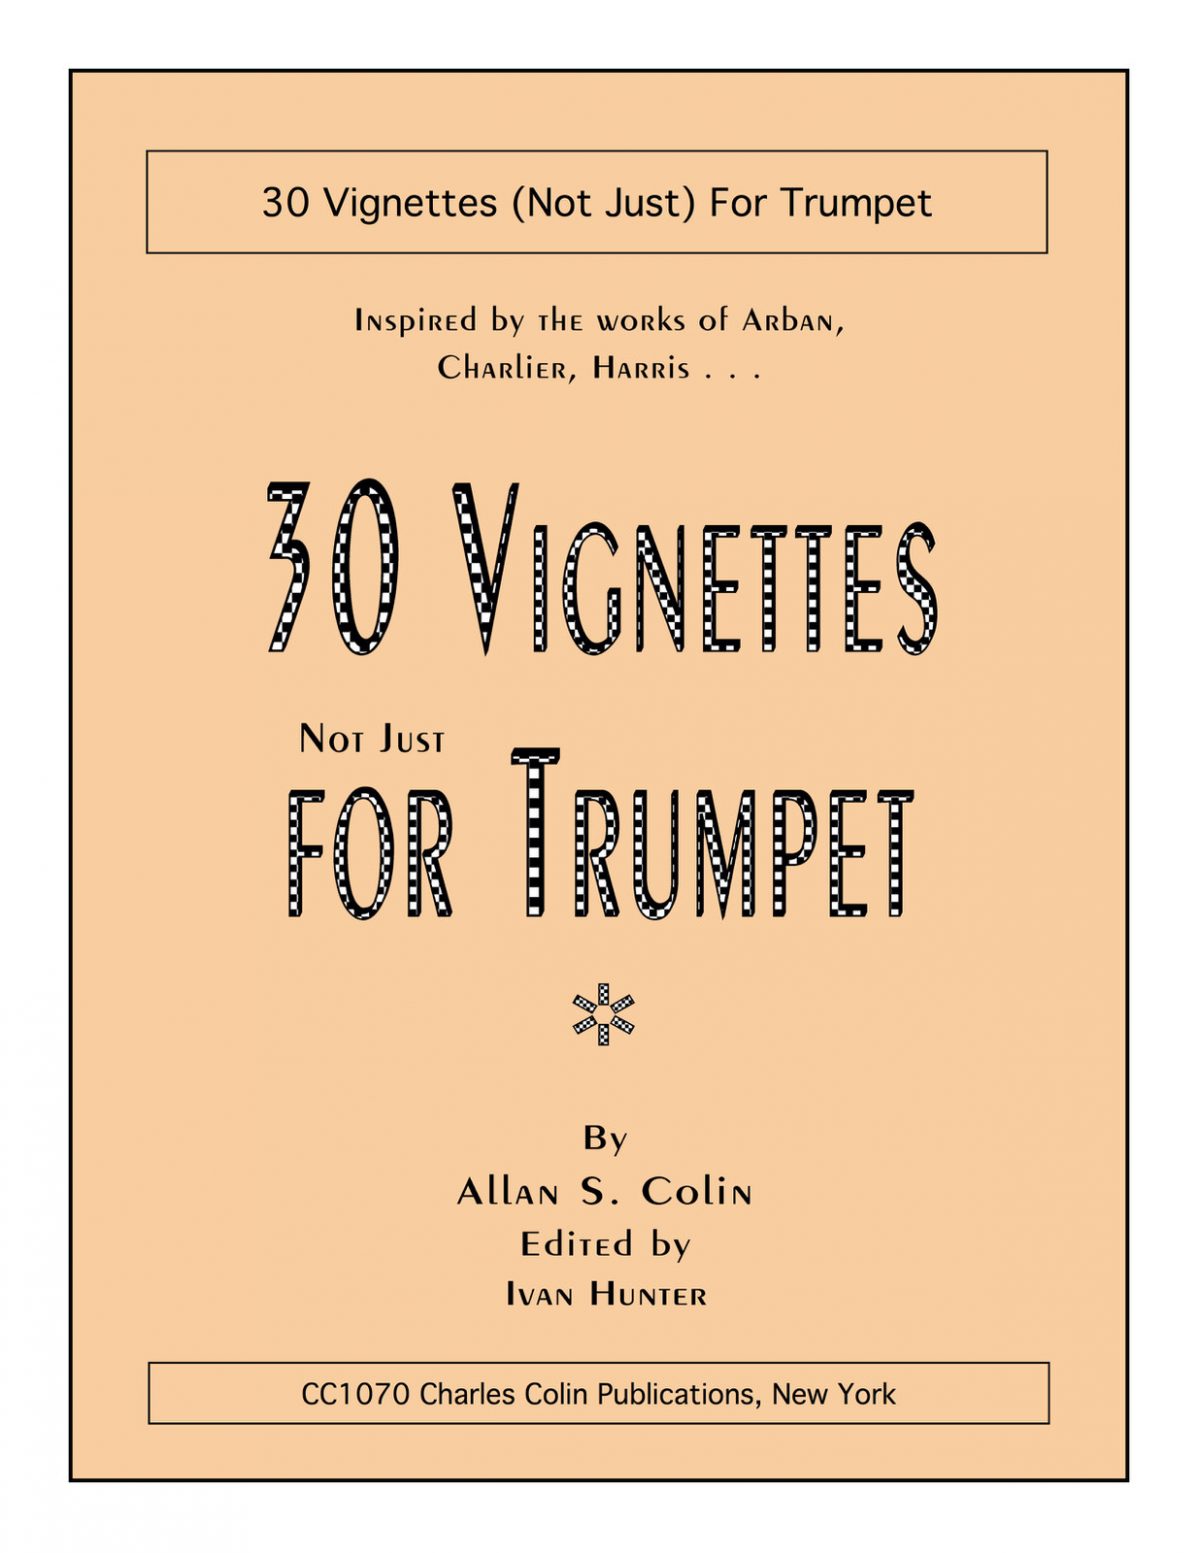 Colin, 30 Vignettes (not just) for Trumpet-p01